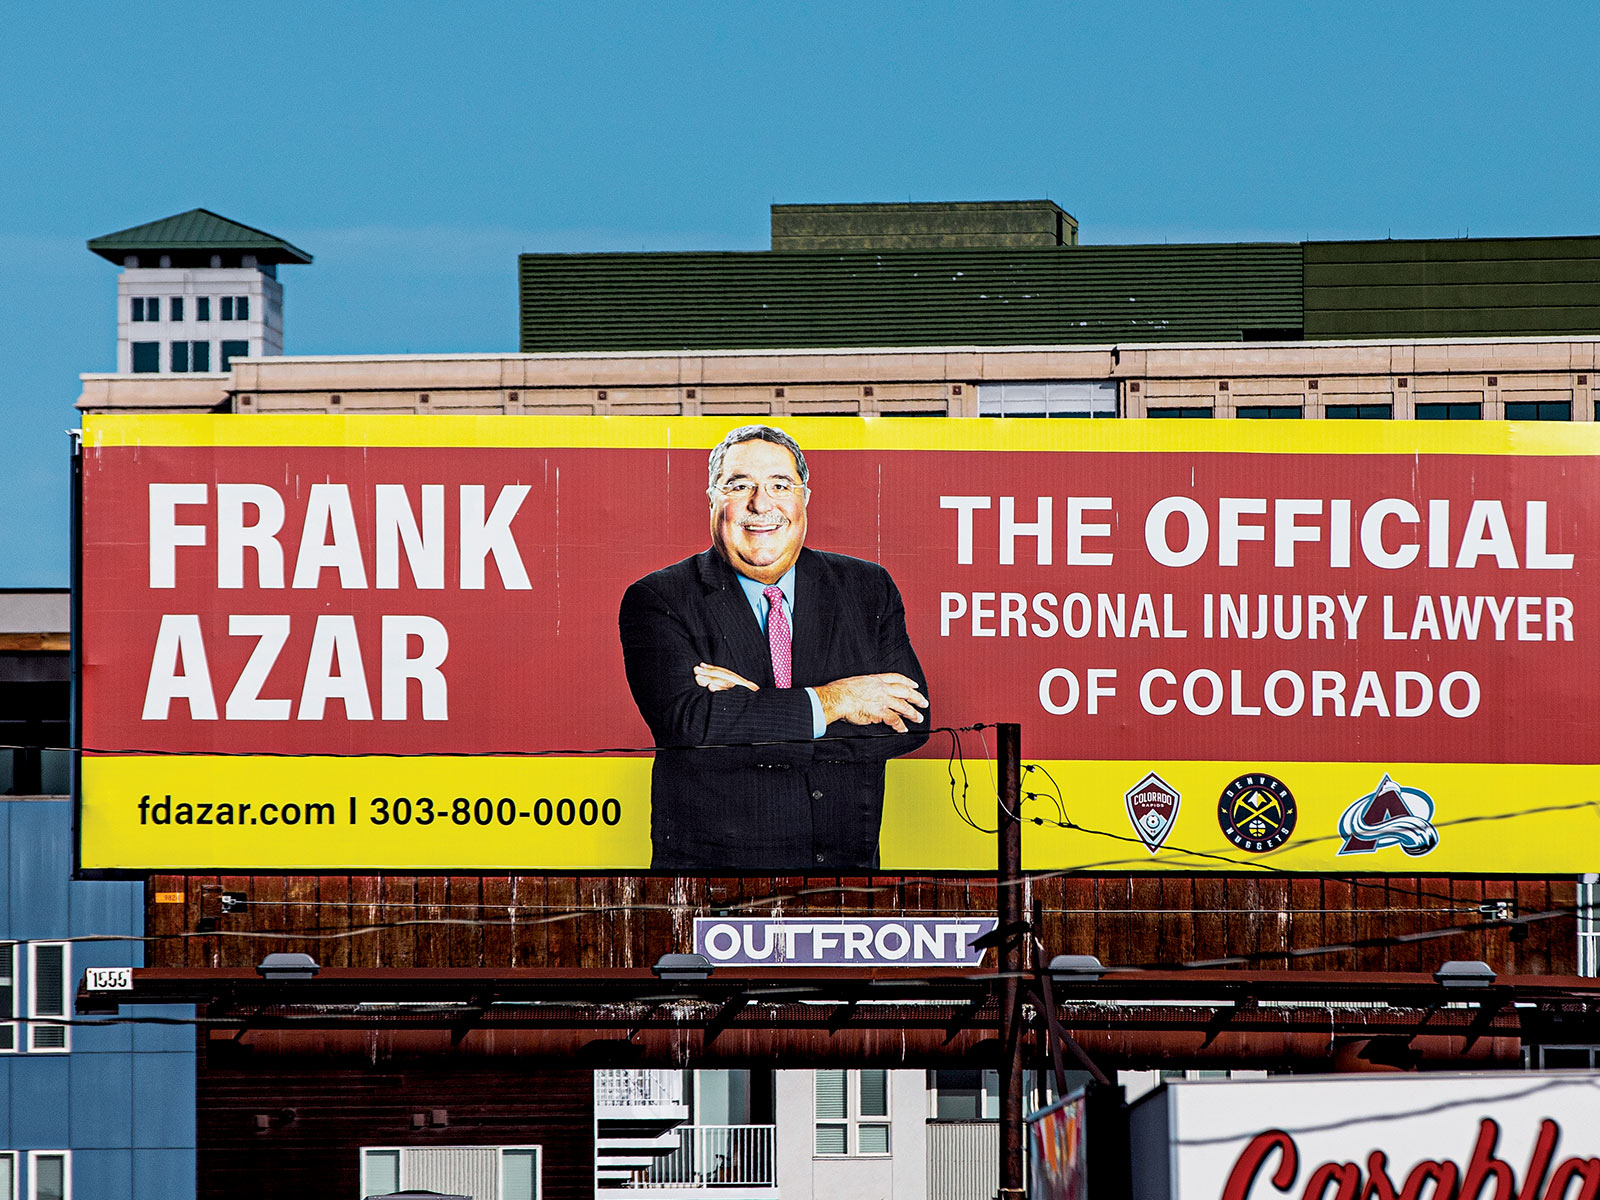 The Top Reasons to Hire Frank Azar Attorney for Your Legal Needs